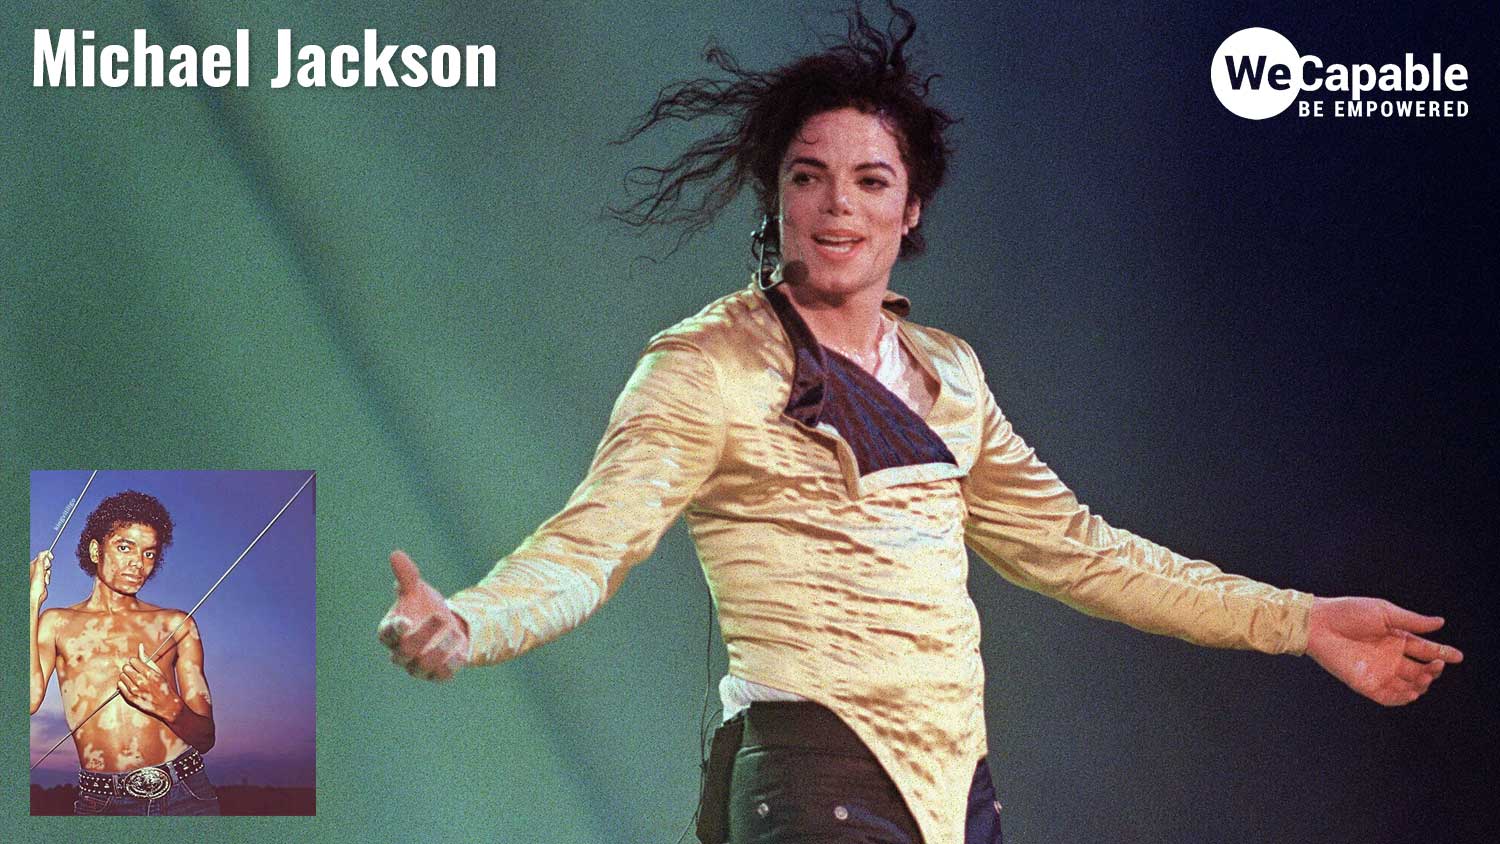 Photograph of michael jackson dancing and inset photo of MJ with vitiligo condition